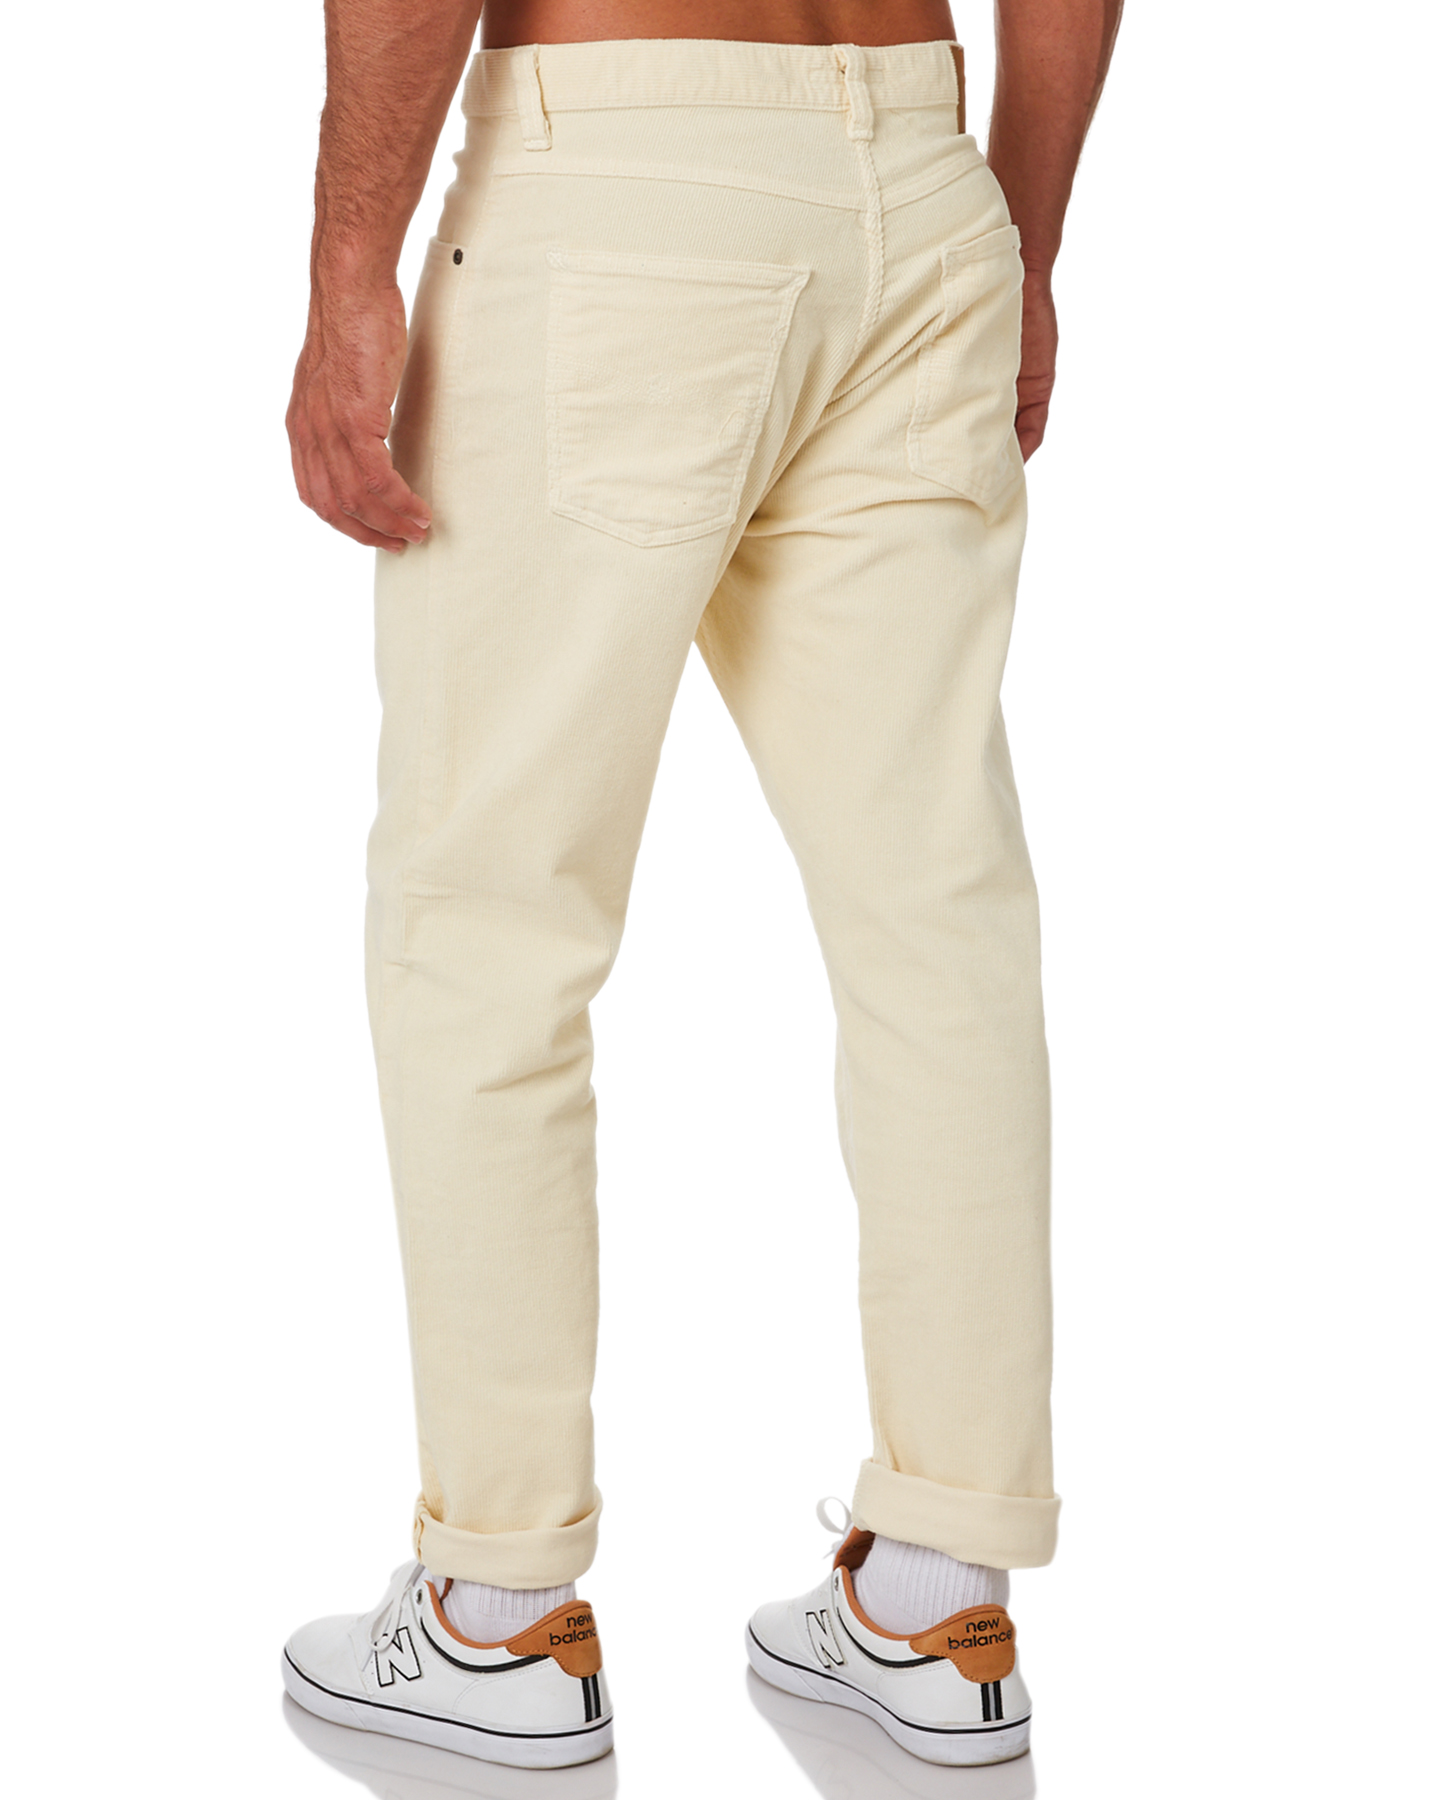 Nudie Jeans Co Steady Eddie Ii Mens Cord Pant - Dusty White | SurfStitch